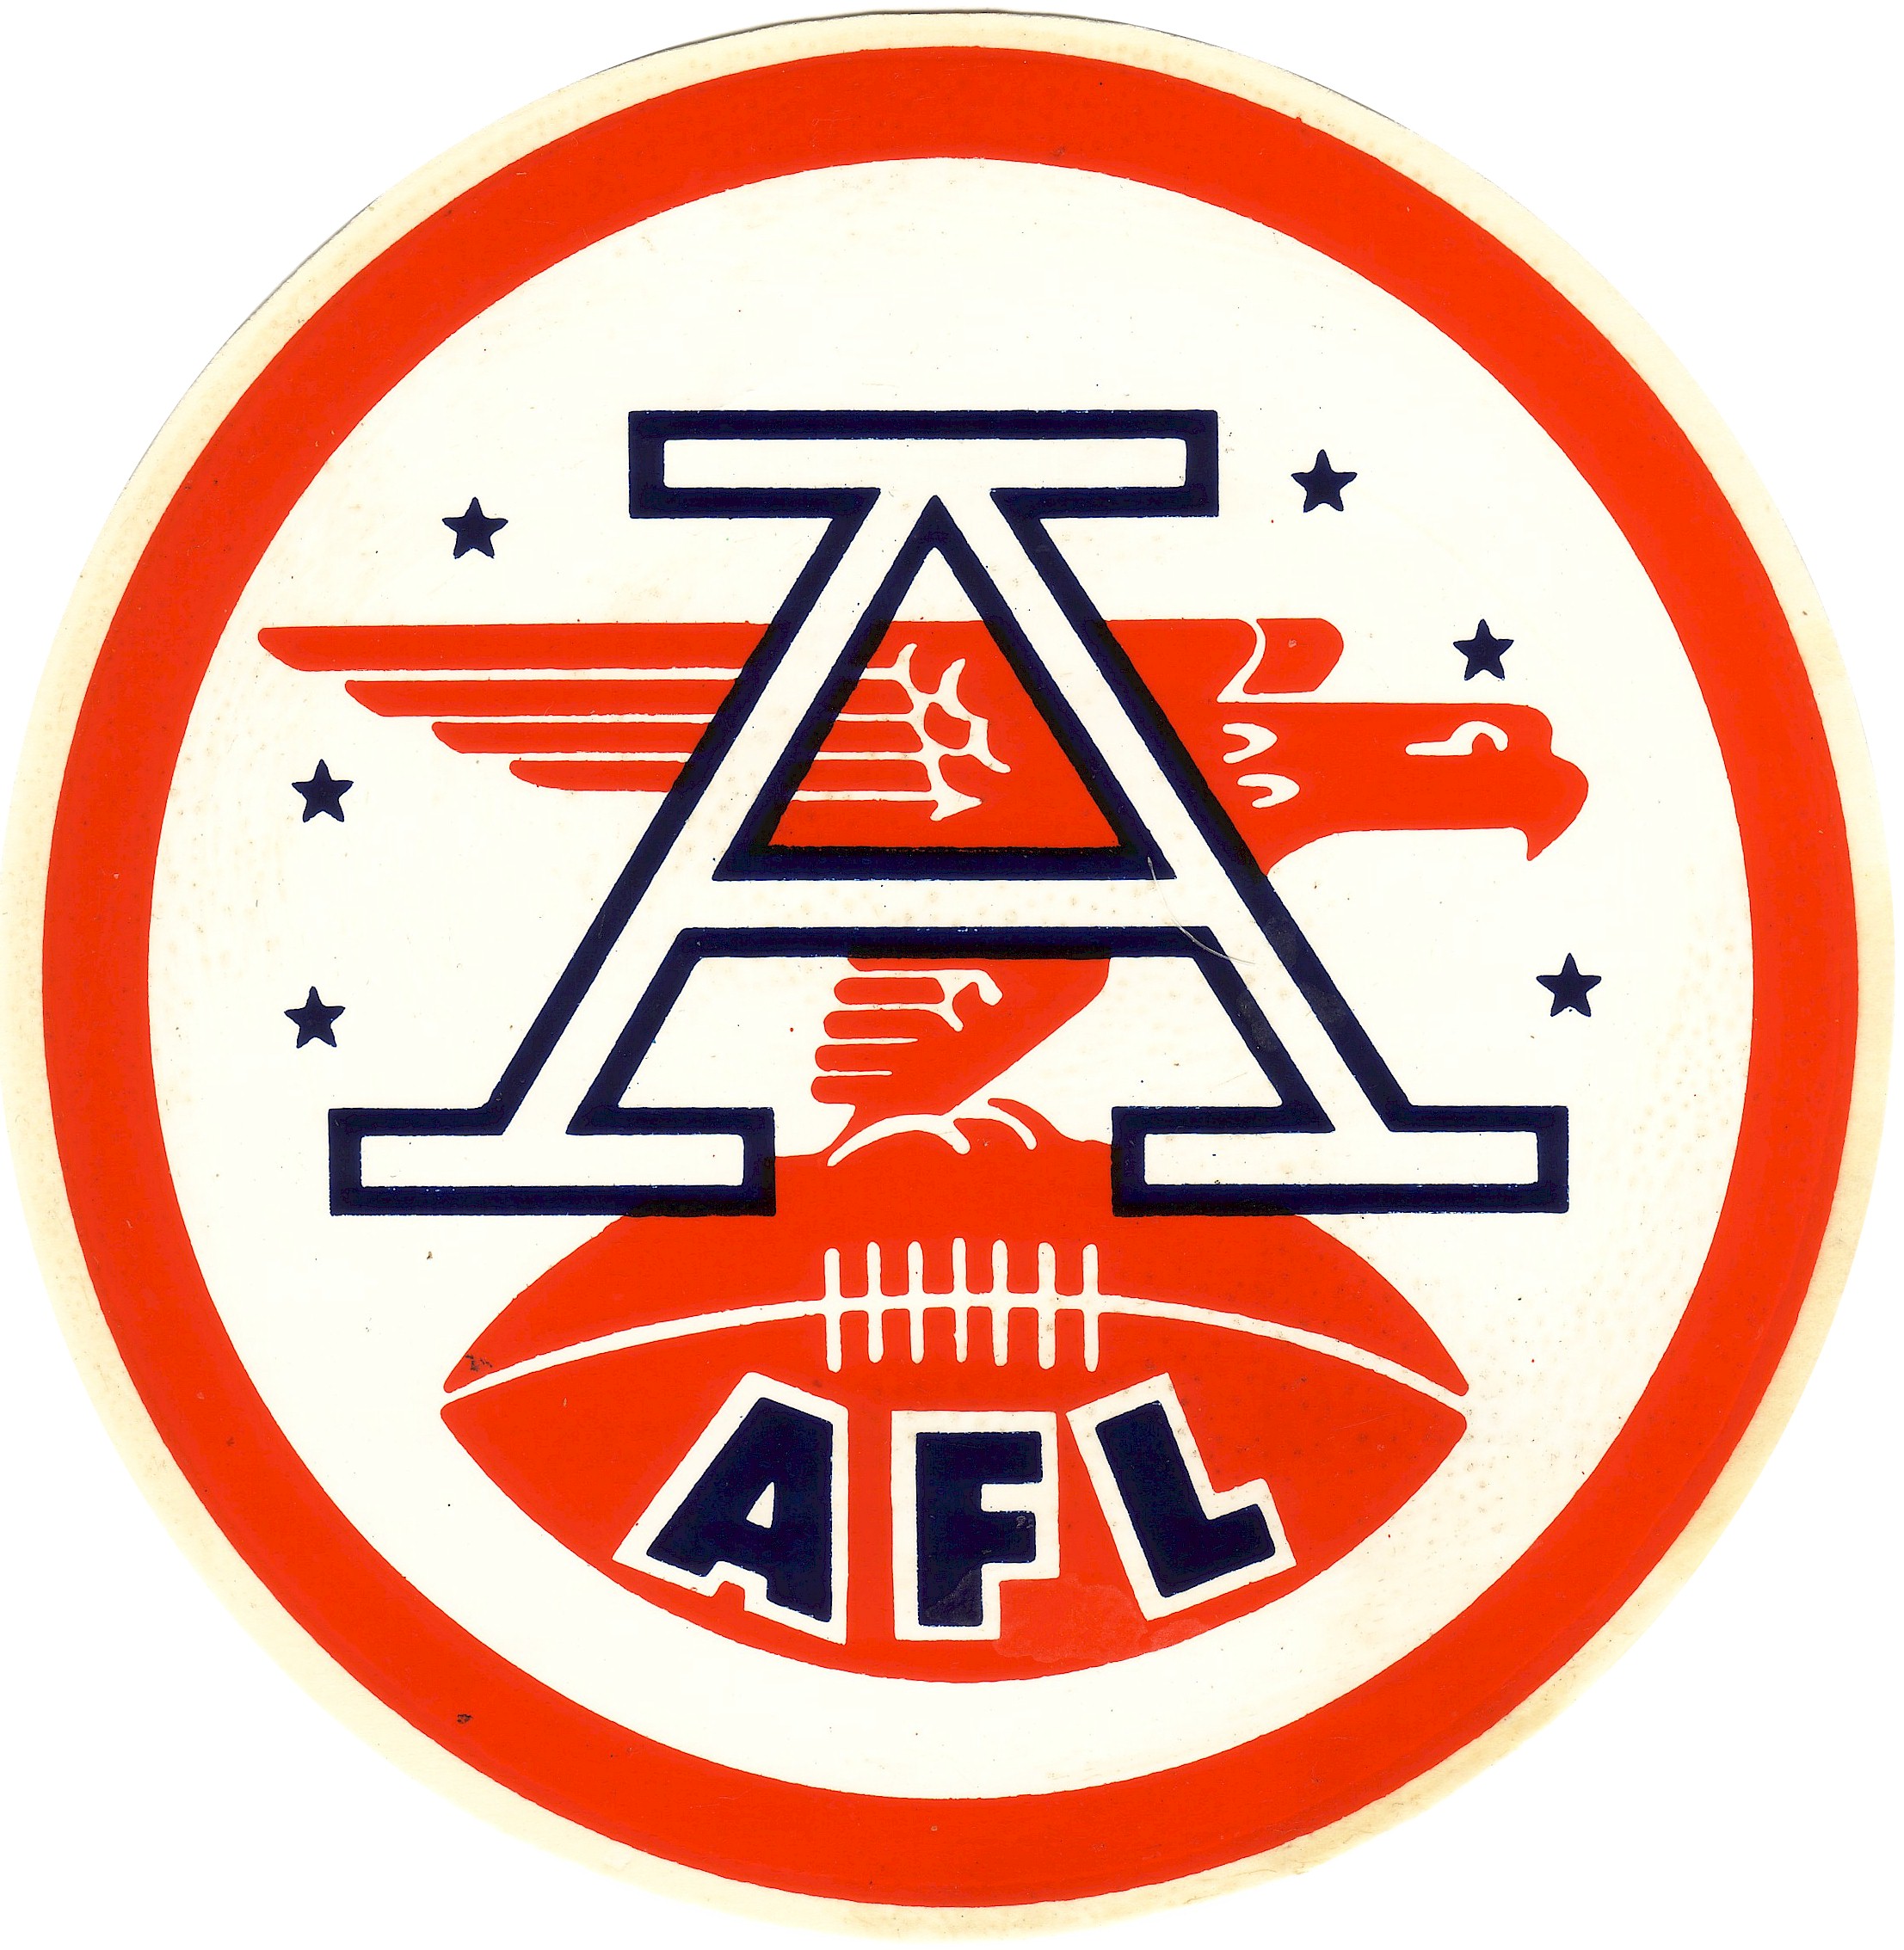 ... , AFL team logos, or other images from the American Football League